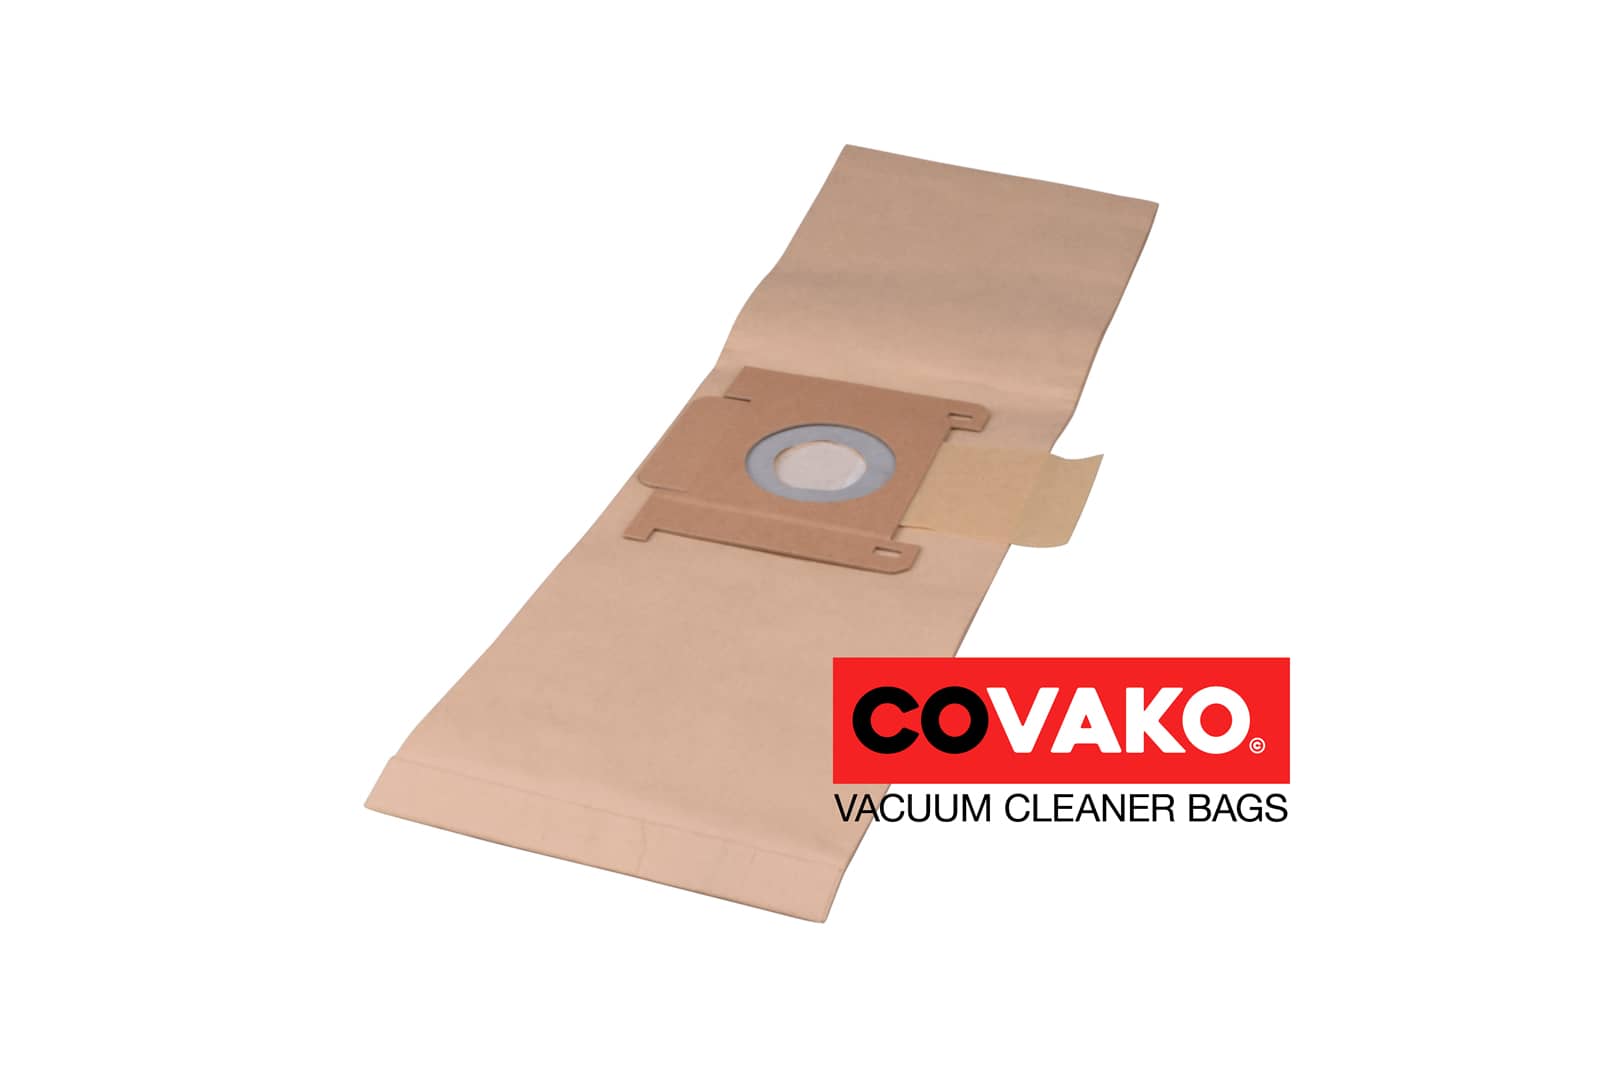 Fast Steady Extra 6.0 / Paper - Fast vacuum cleaner bags